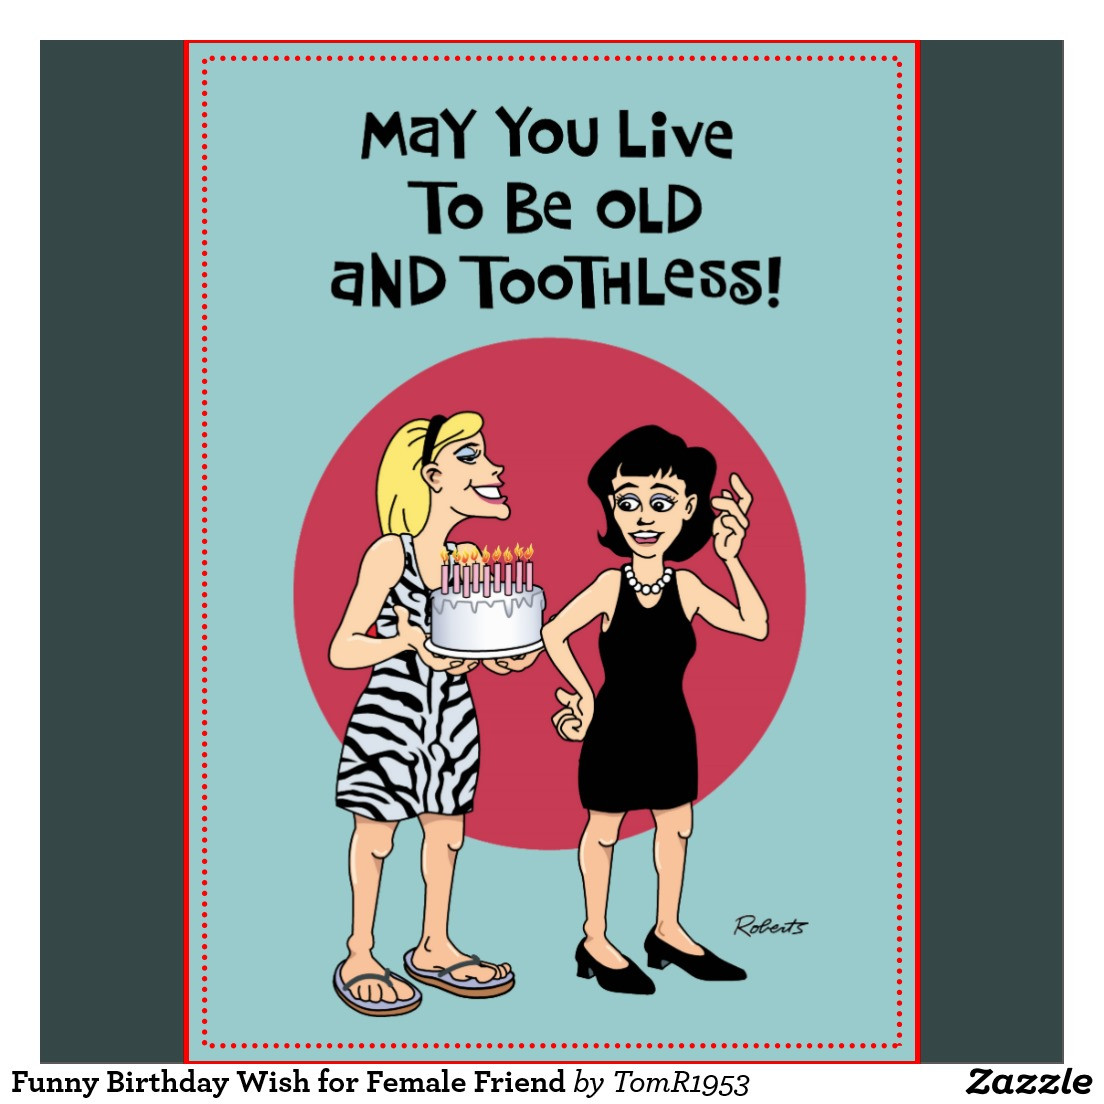 Funny Friend Birthday Wishes
 20 Most Funniest Birthday Wishes And